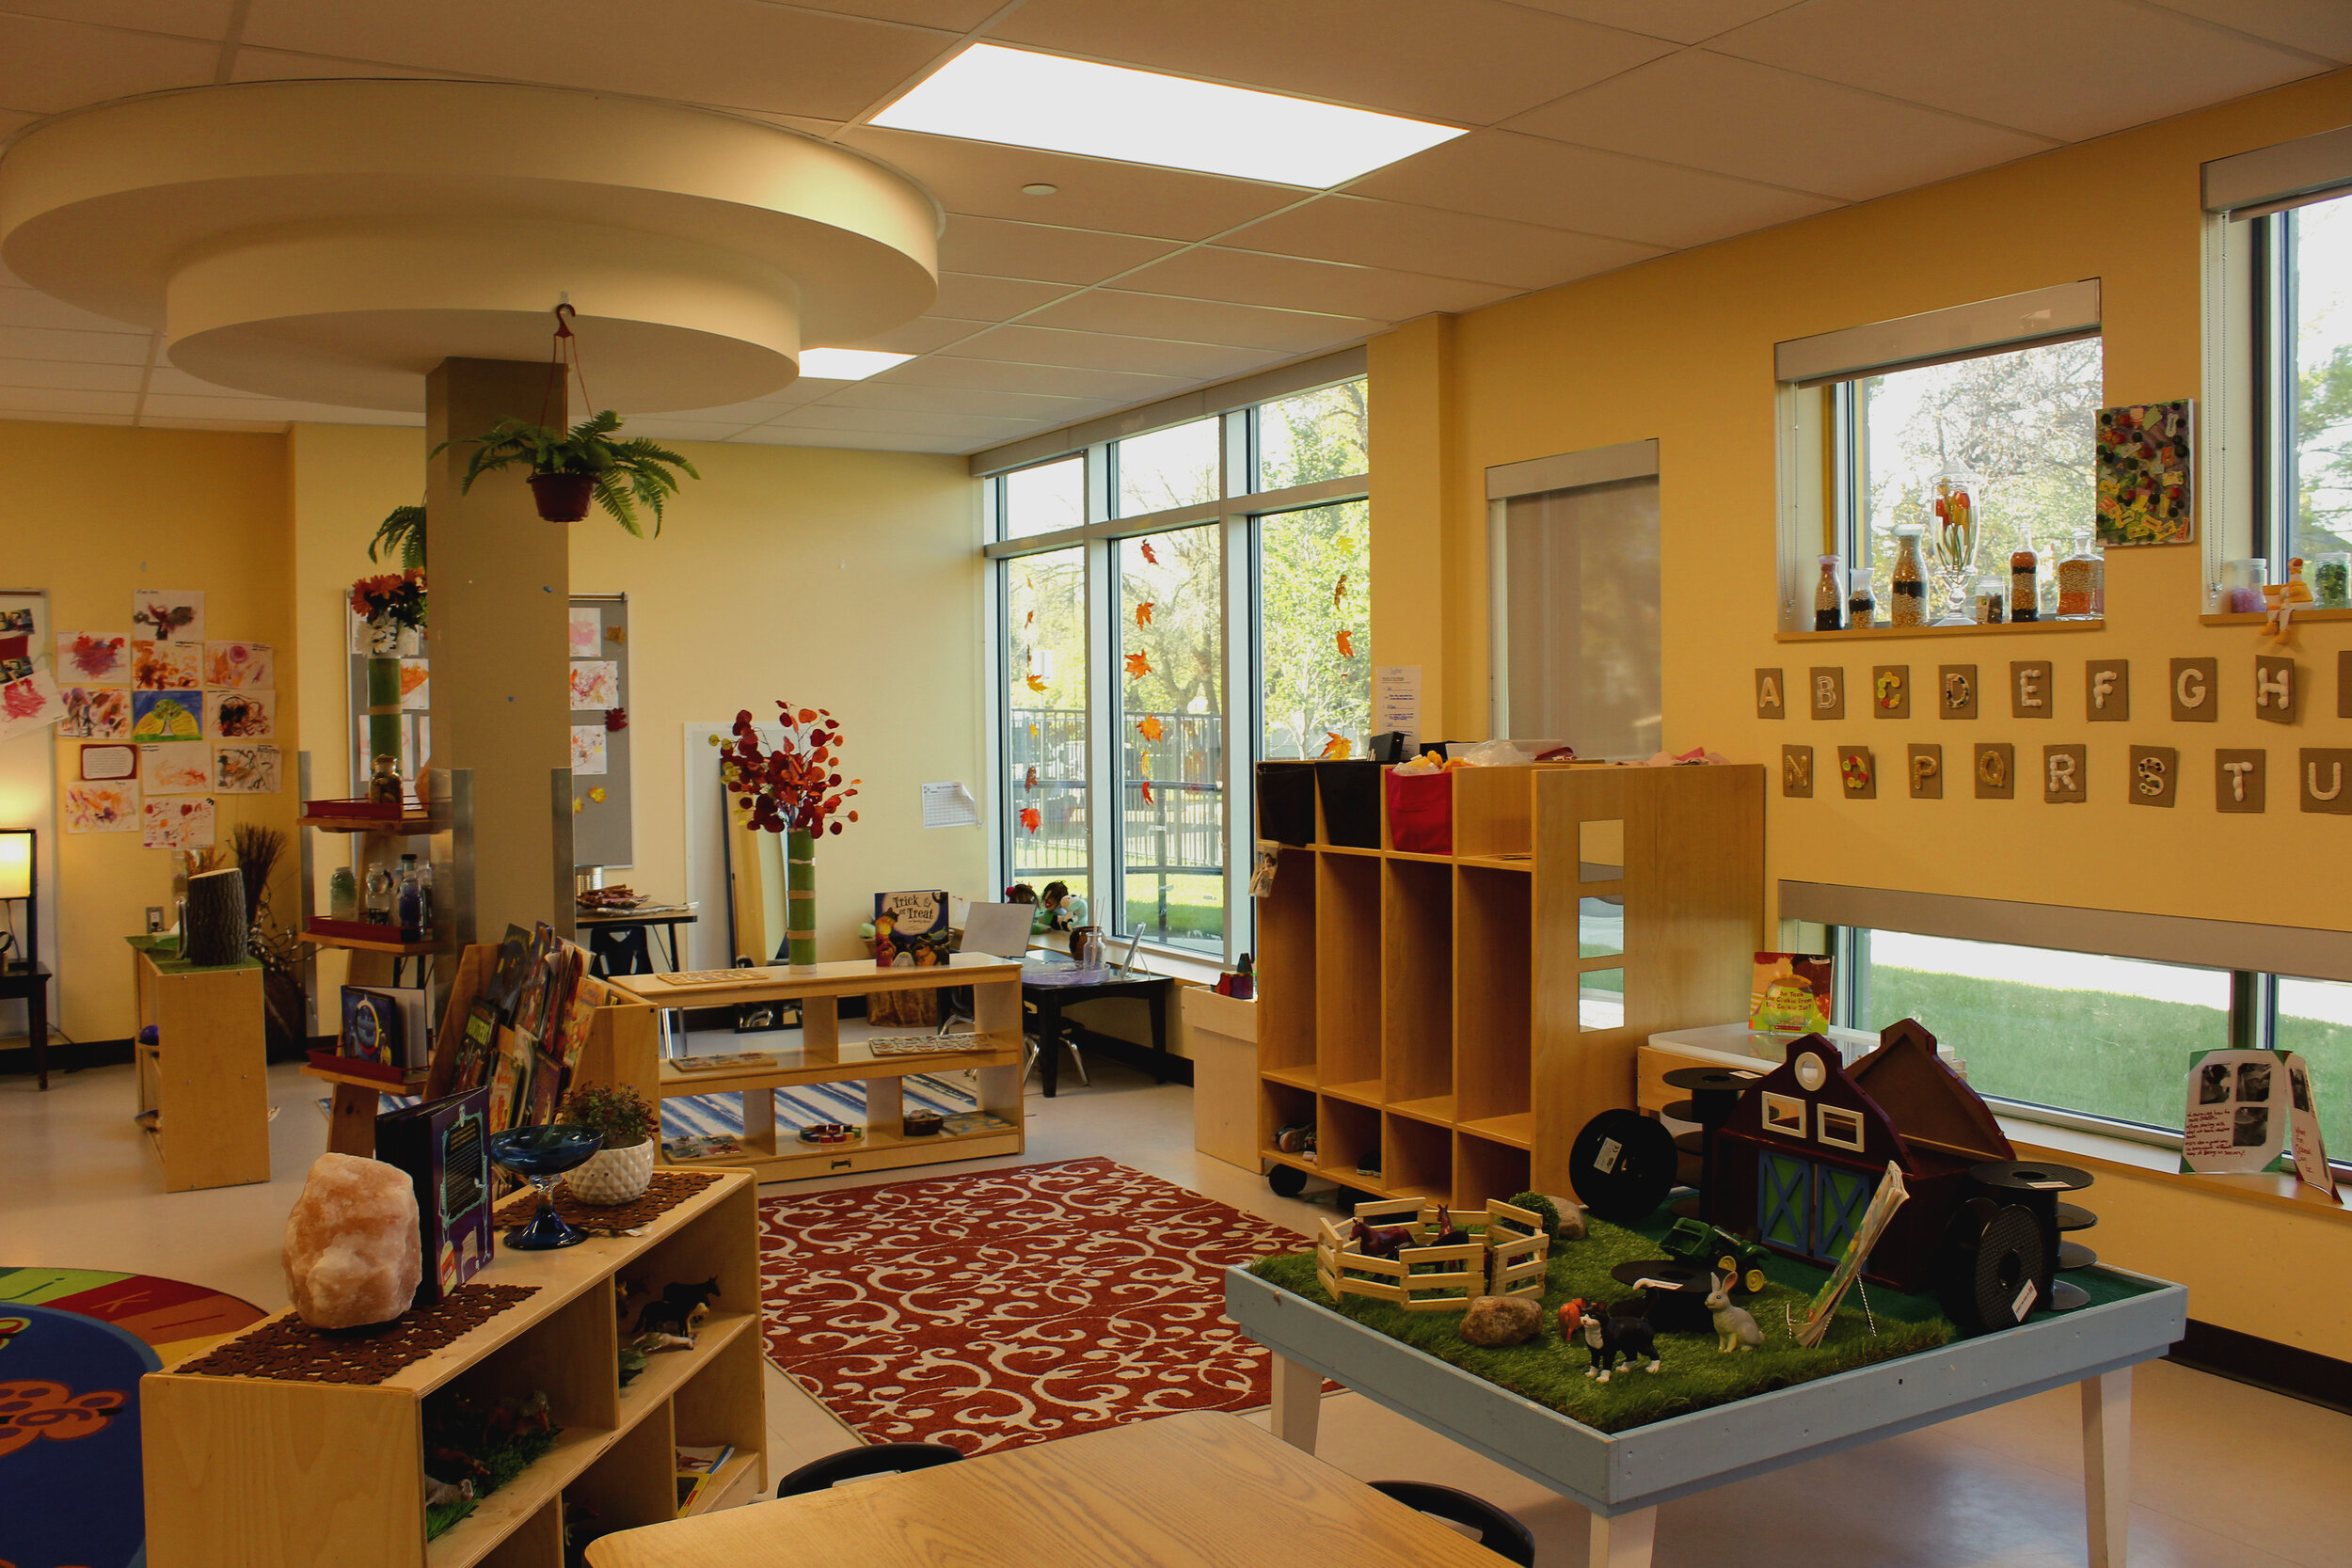 Sacred Heart Staff — Prairie Lily Early Learning Centre